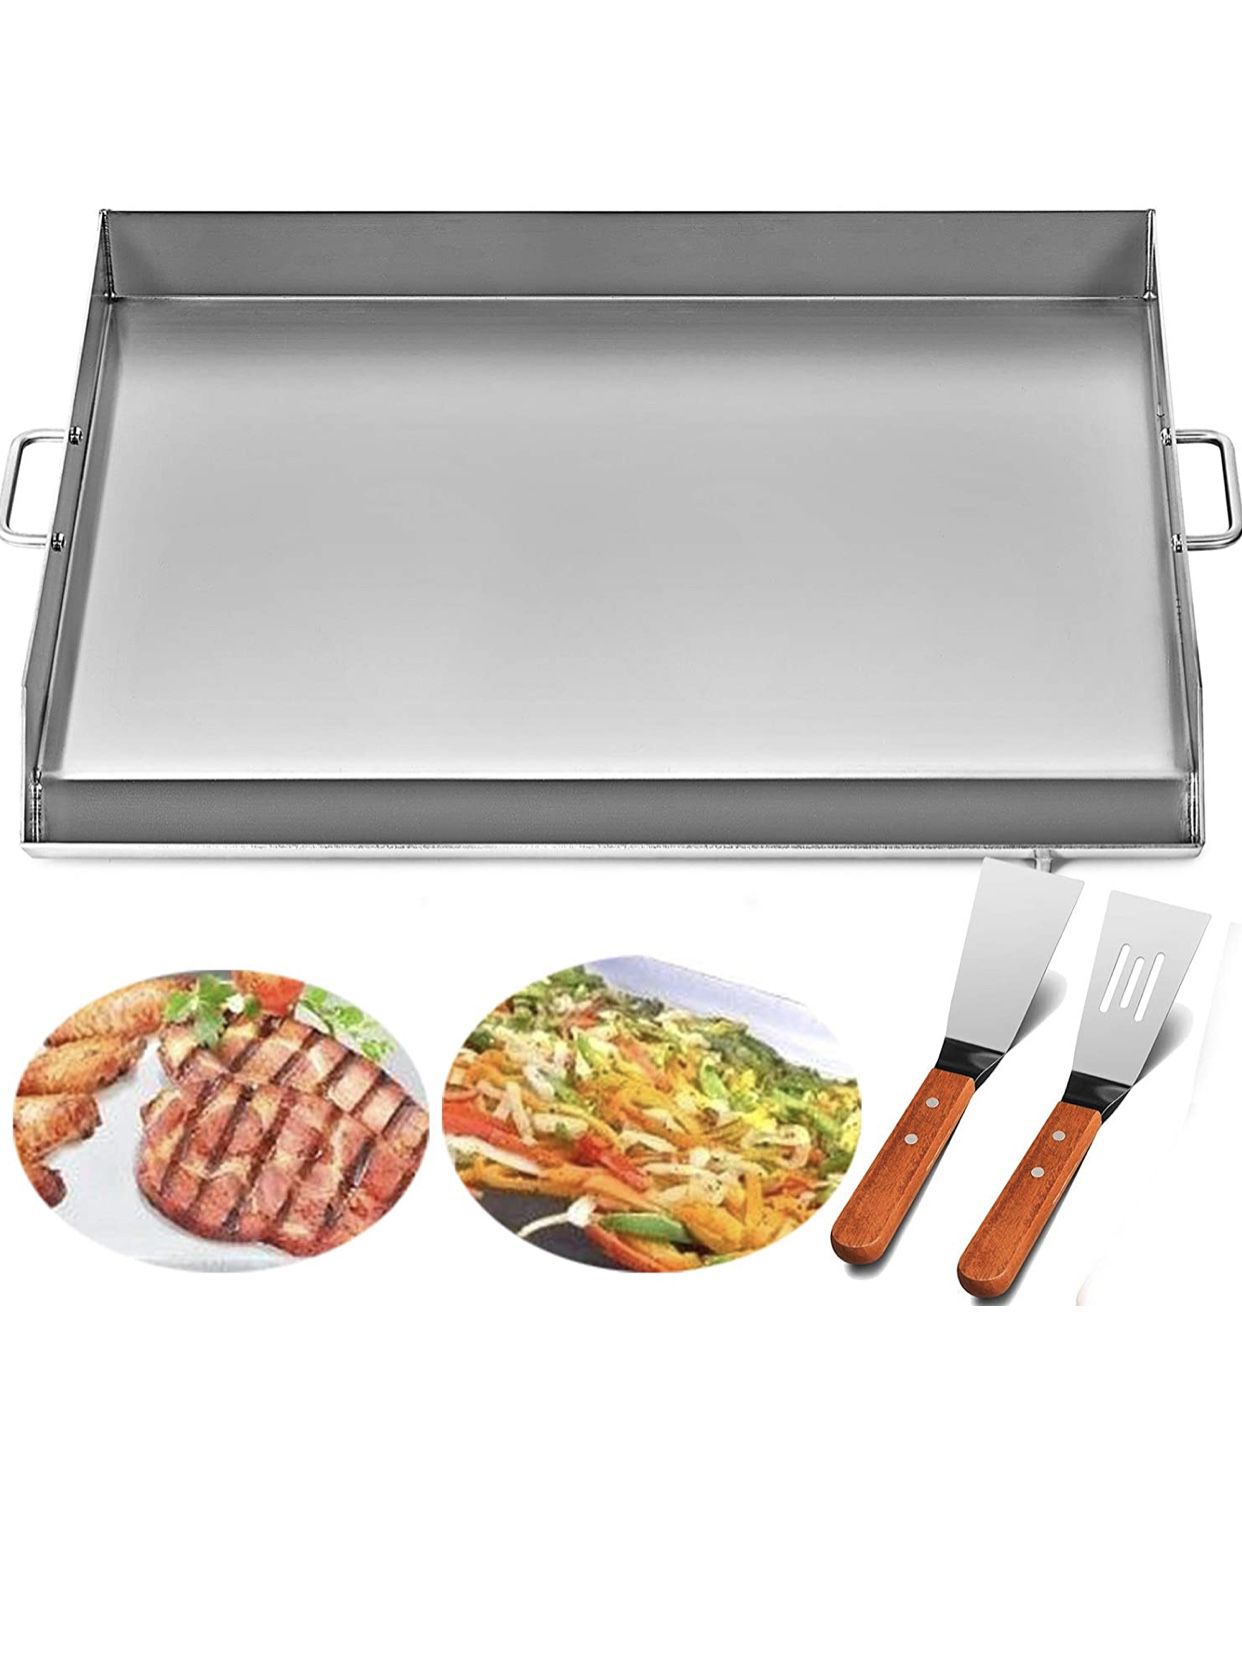 Universal Flat Top Griddle 36x22 inches BBQ Grills Stainless Steel Non Stick Burner Griddle with Removable Handles for Restaurant or Home Use